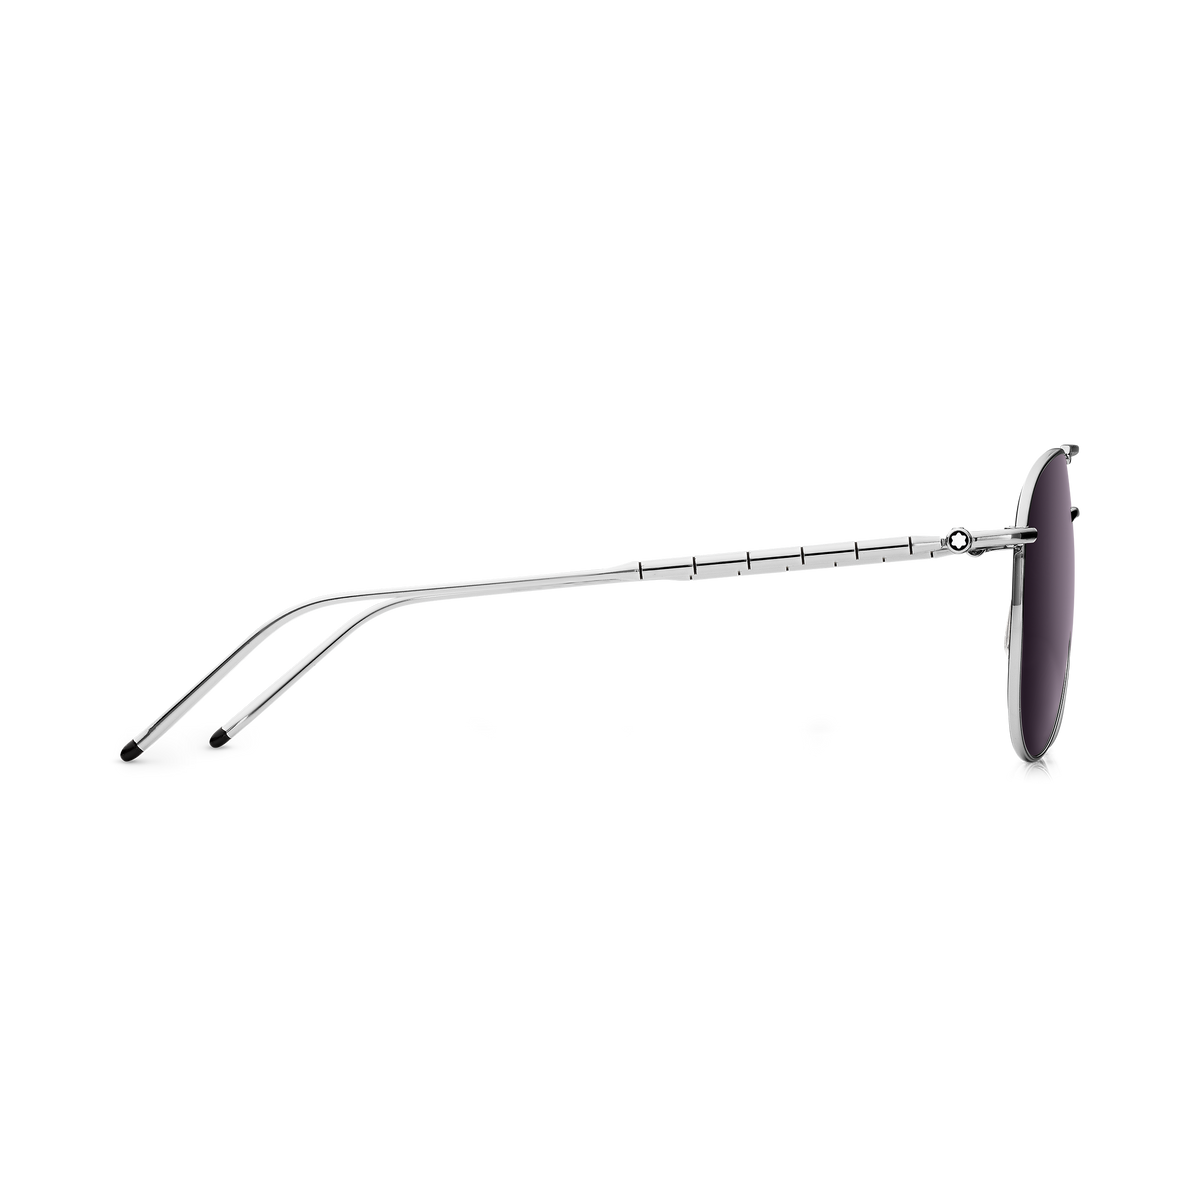 Squared Sunglasses with Silver-Colored Metal Frame